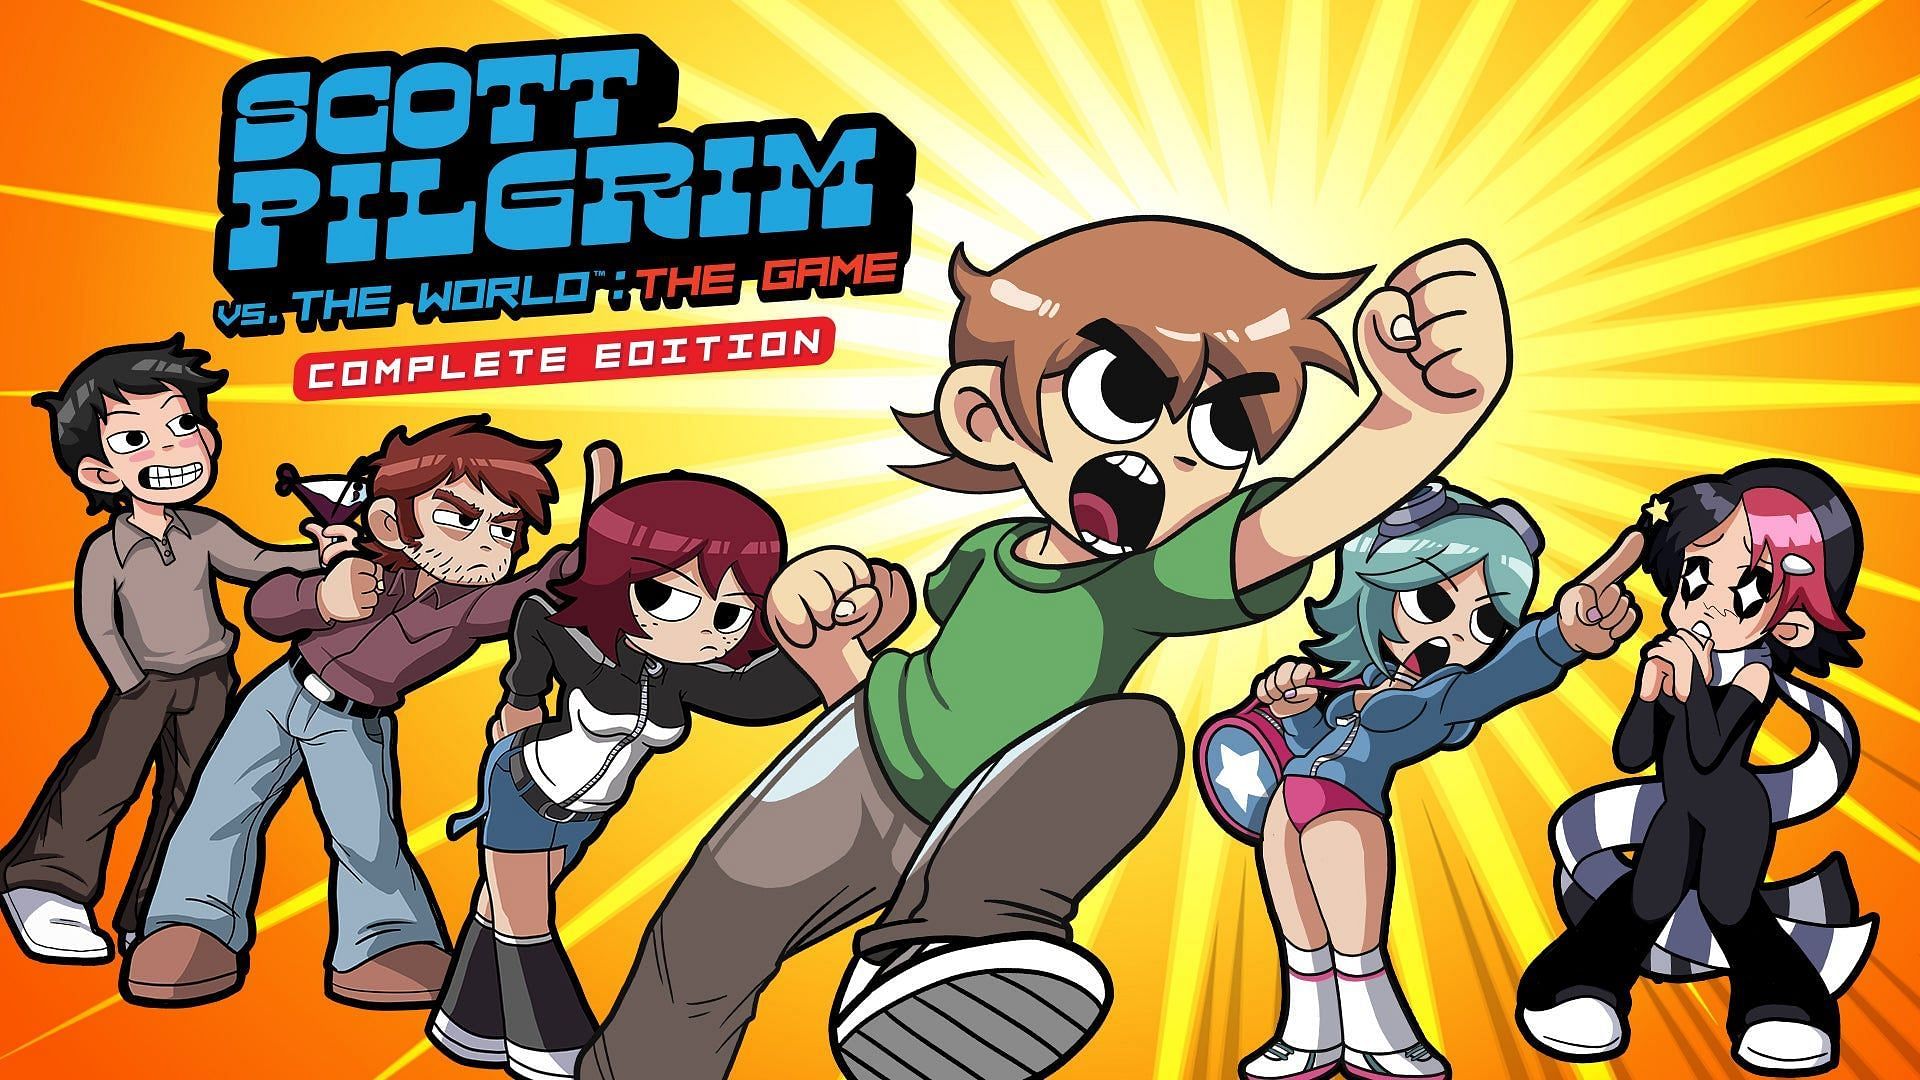 Scott Pilgrim' is coming back as a cartoon with the film's entire cast